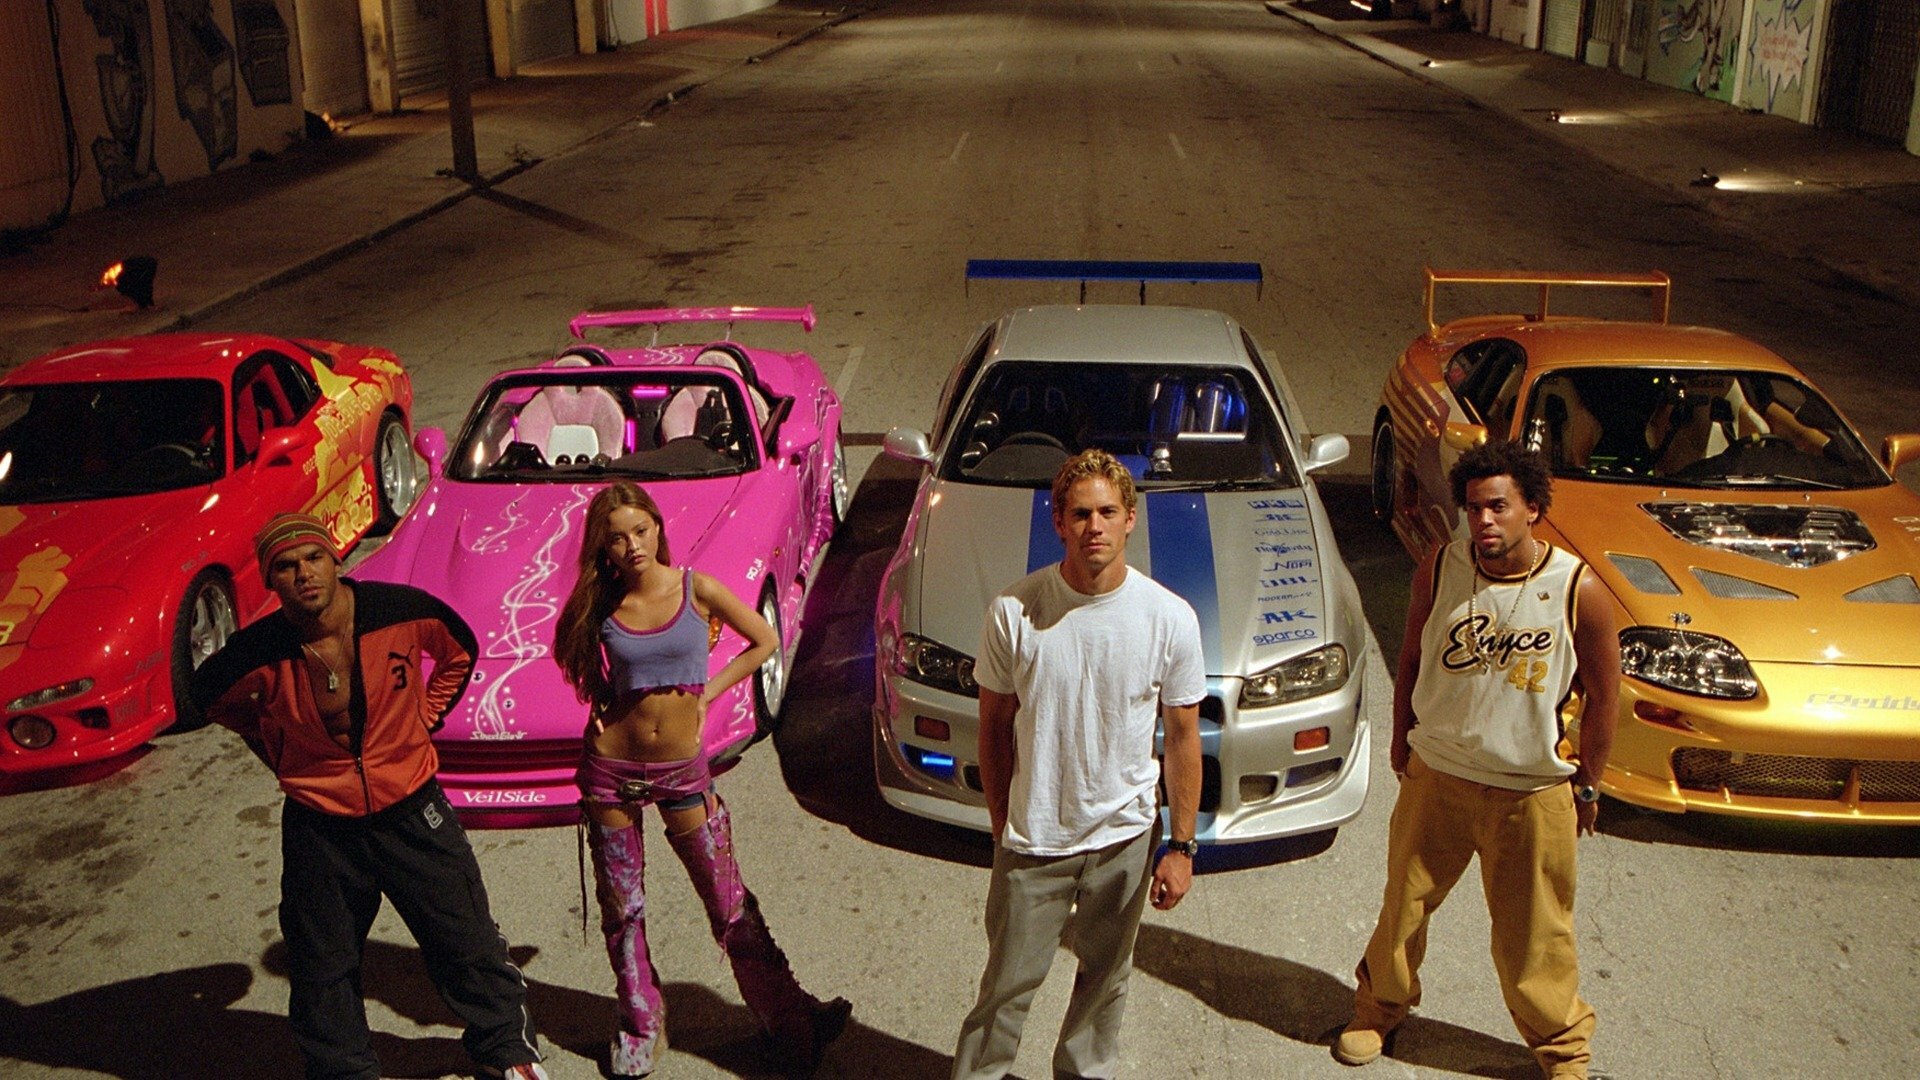 Fast & Furious watch order: How to watch the car action series in order